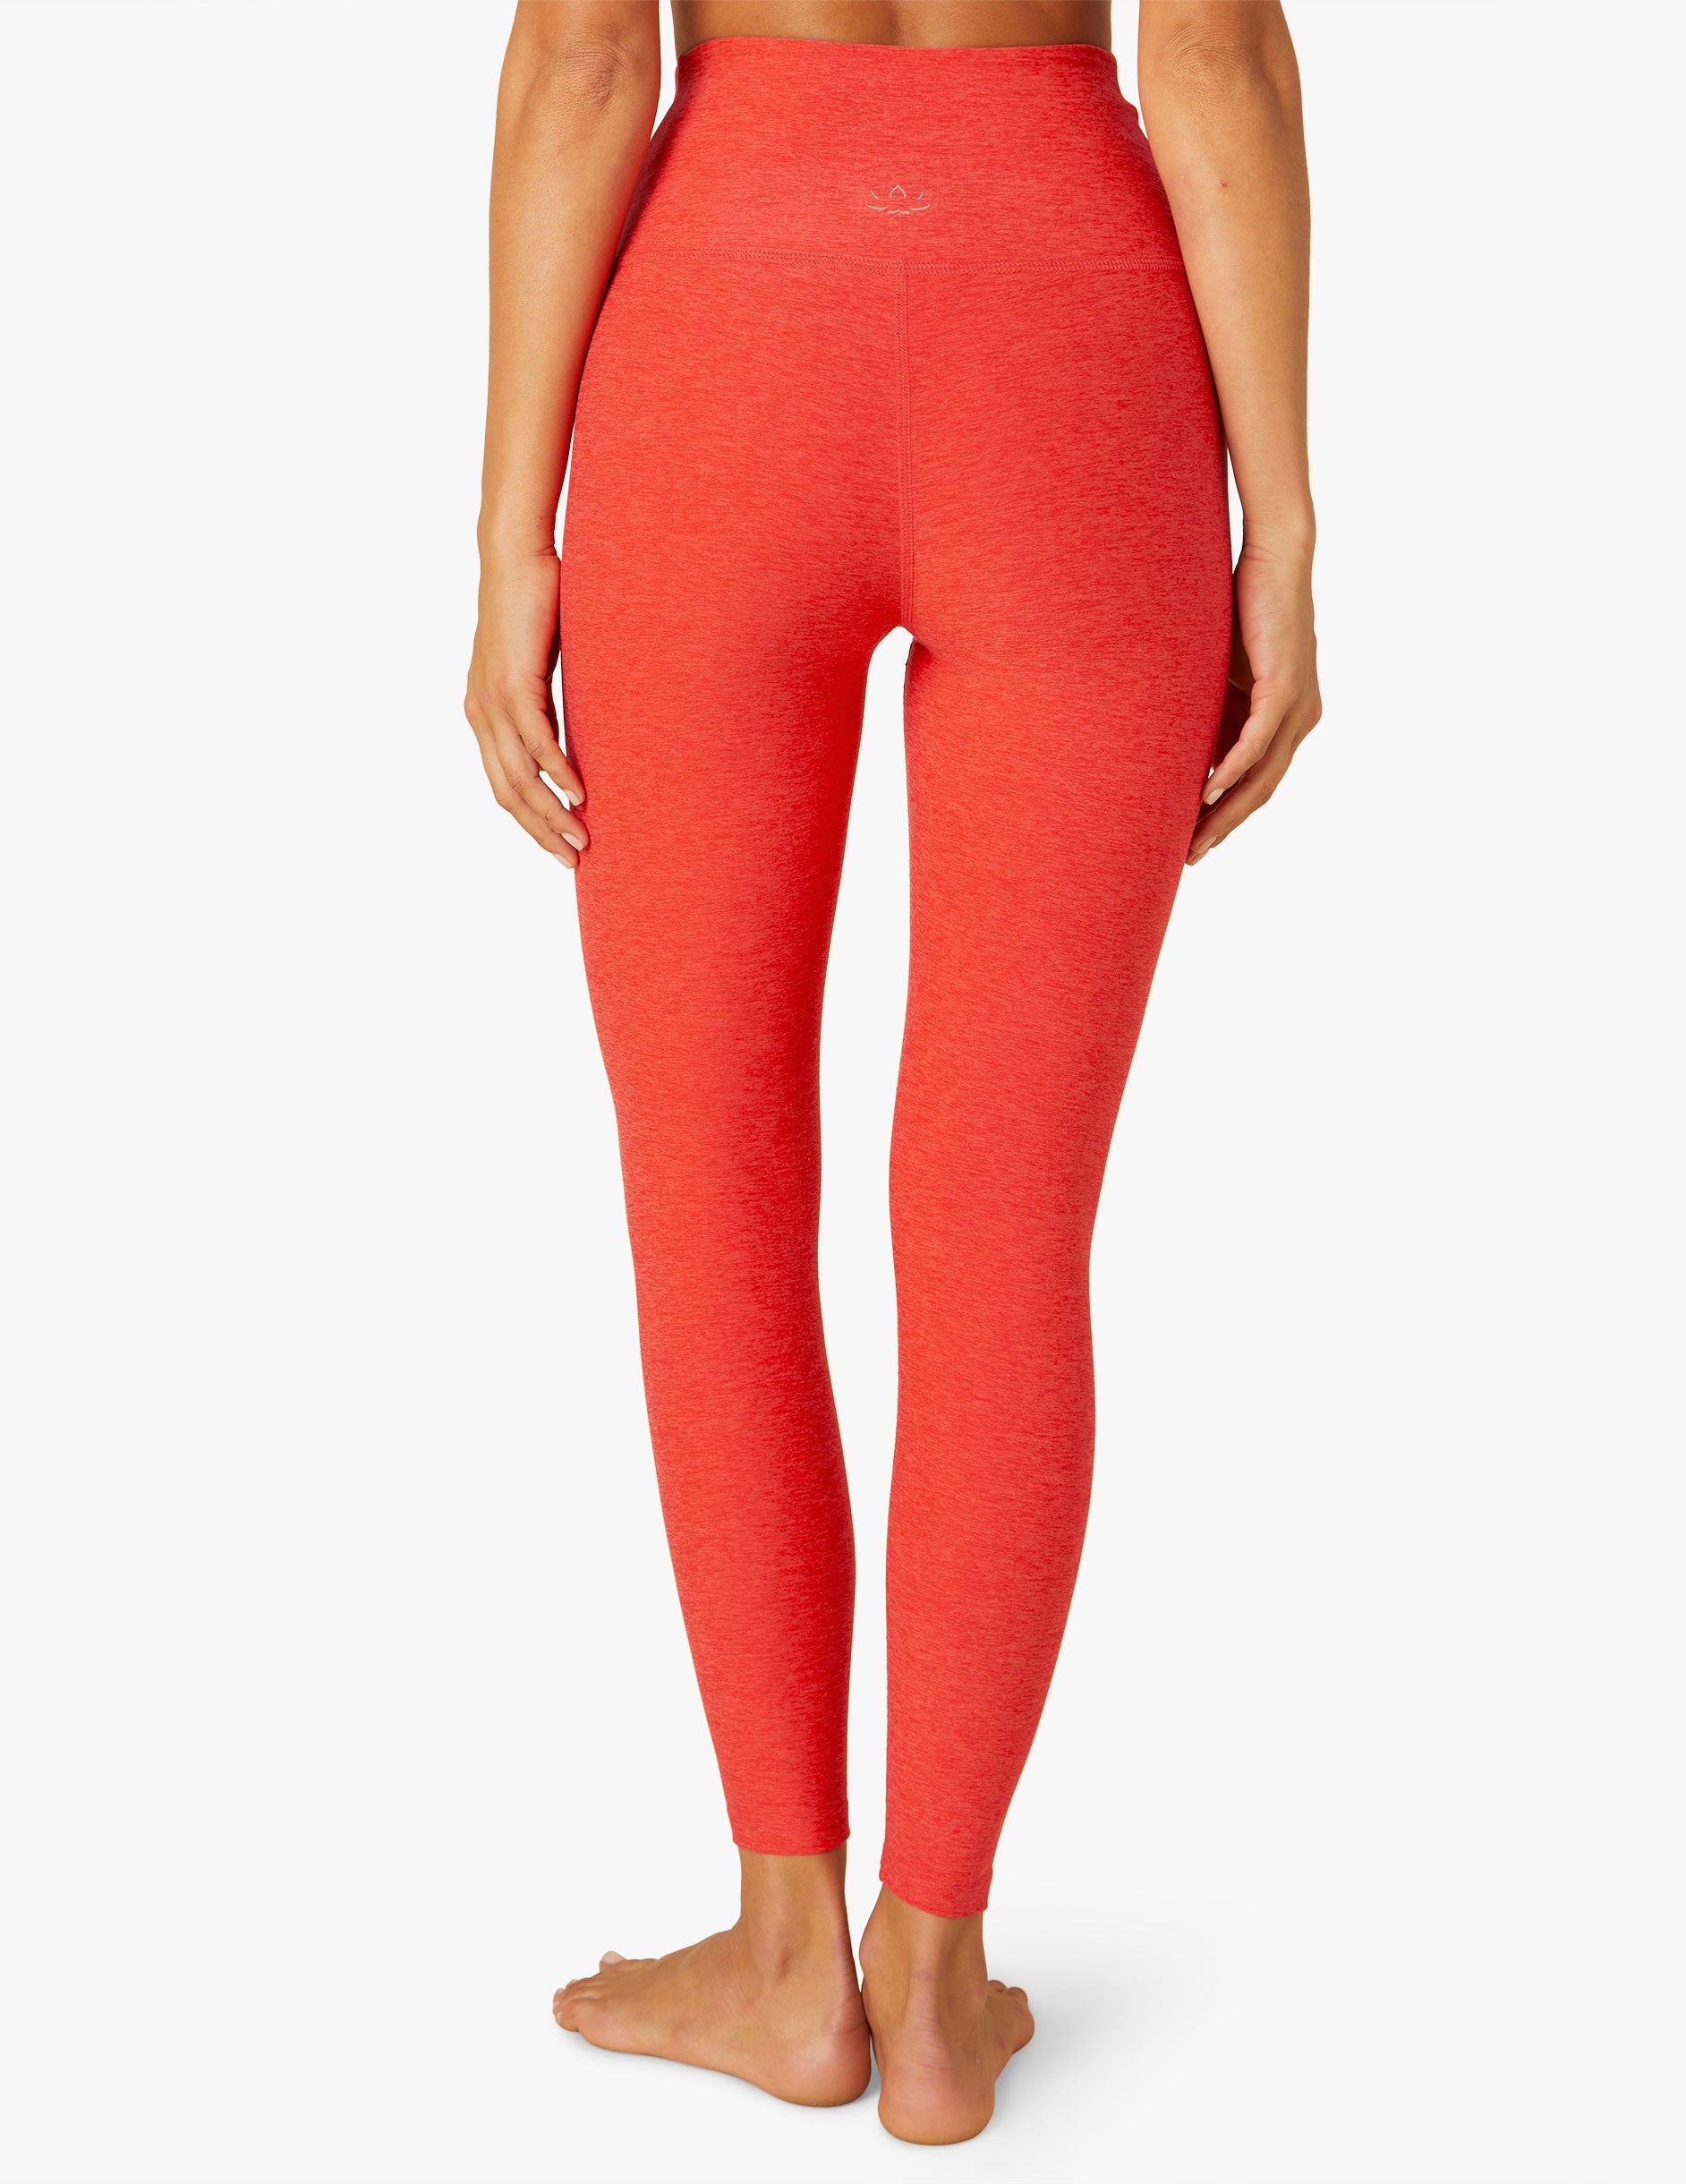 red midi high waisted legging with over lapping detail at waist